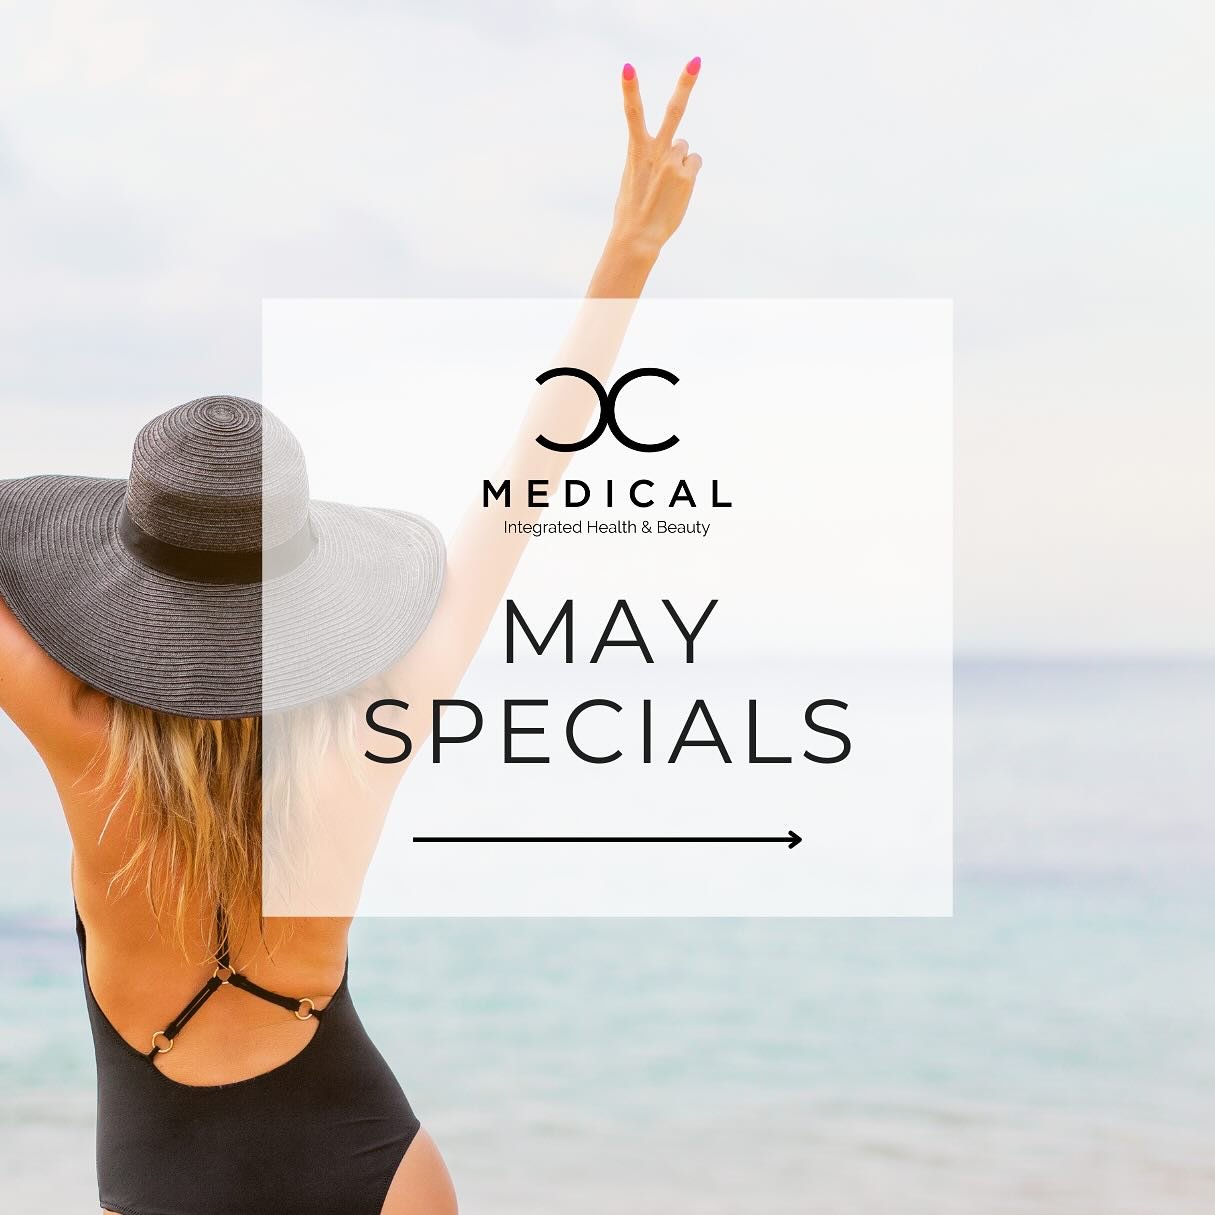 ✨May Specials✨

💝 Mother&rsquo;s Day BOGO
Purchase $300 gift card for mom (5/1-5/11) + receive an extra $50 gift card 

☀️ Free @eltamd sunscreen with any BBL, MOXI or Opus treatment

👄 15% off lip filler

🤍 10% off all threads (consult required p